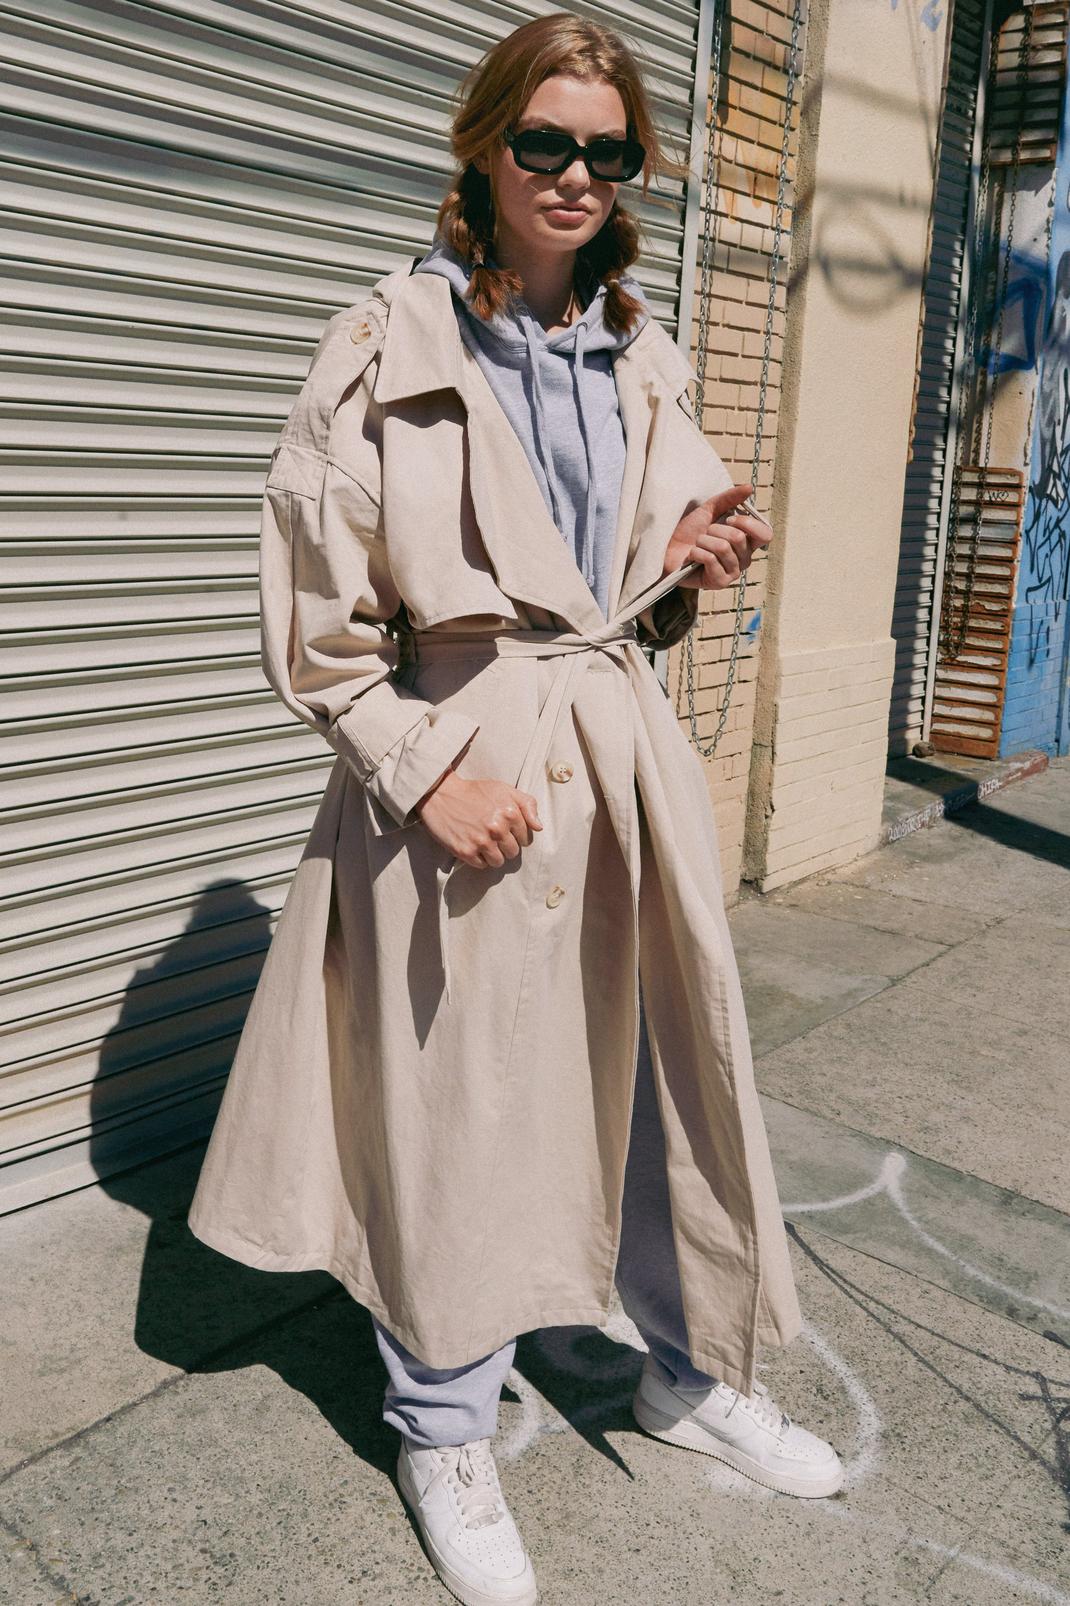 Women's Oversize belted trench coat I